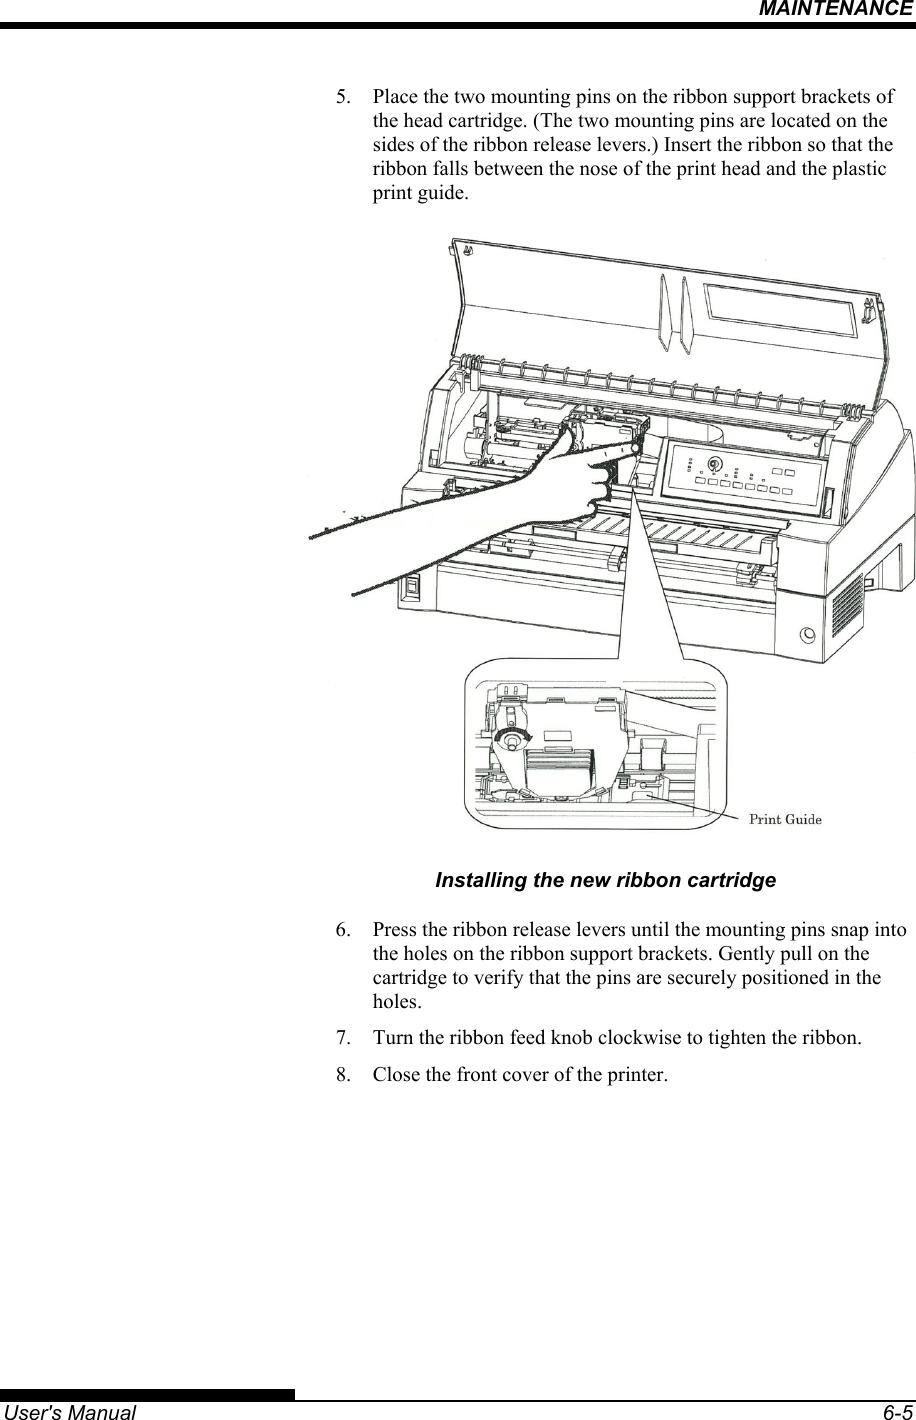 MAINTENANCE   User&apos;s Manual  6-5 5.  Place the two mounting pins on the ribbon support brackets of the head cartridge. (The two mounting pins are located on the sides of the ribbon release levers.) Insert the ribbon so that the ribbon falls between the nose of the print head and the plastic print guide.  Installing the new ribbon cartridge 6.  Press the ribbon release levers until the mounting pins snap into the holes on the ribbon support brackets. Gently pull on the cartridge to verify that the pins are securely positioned in the holes. 7.  Turn the ribbon feed knob clockwise to tighten the ribbon. 8.  Close the front cover of the printer.  